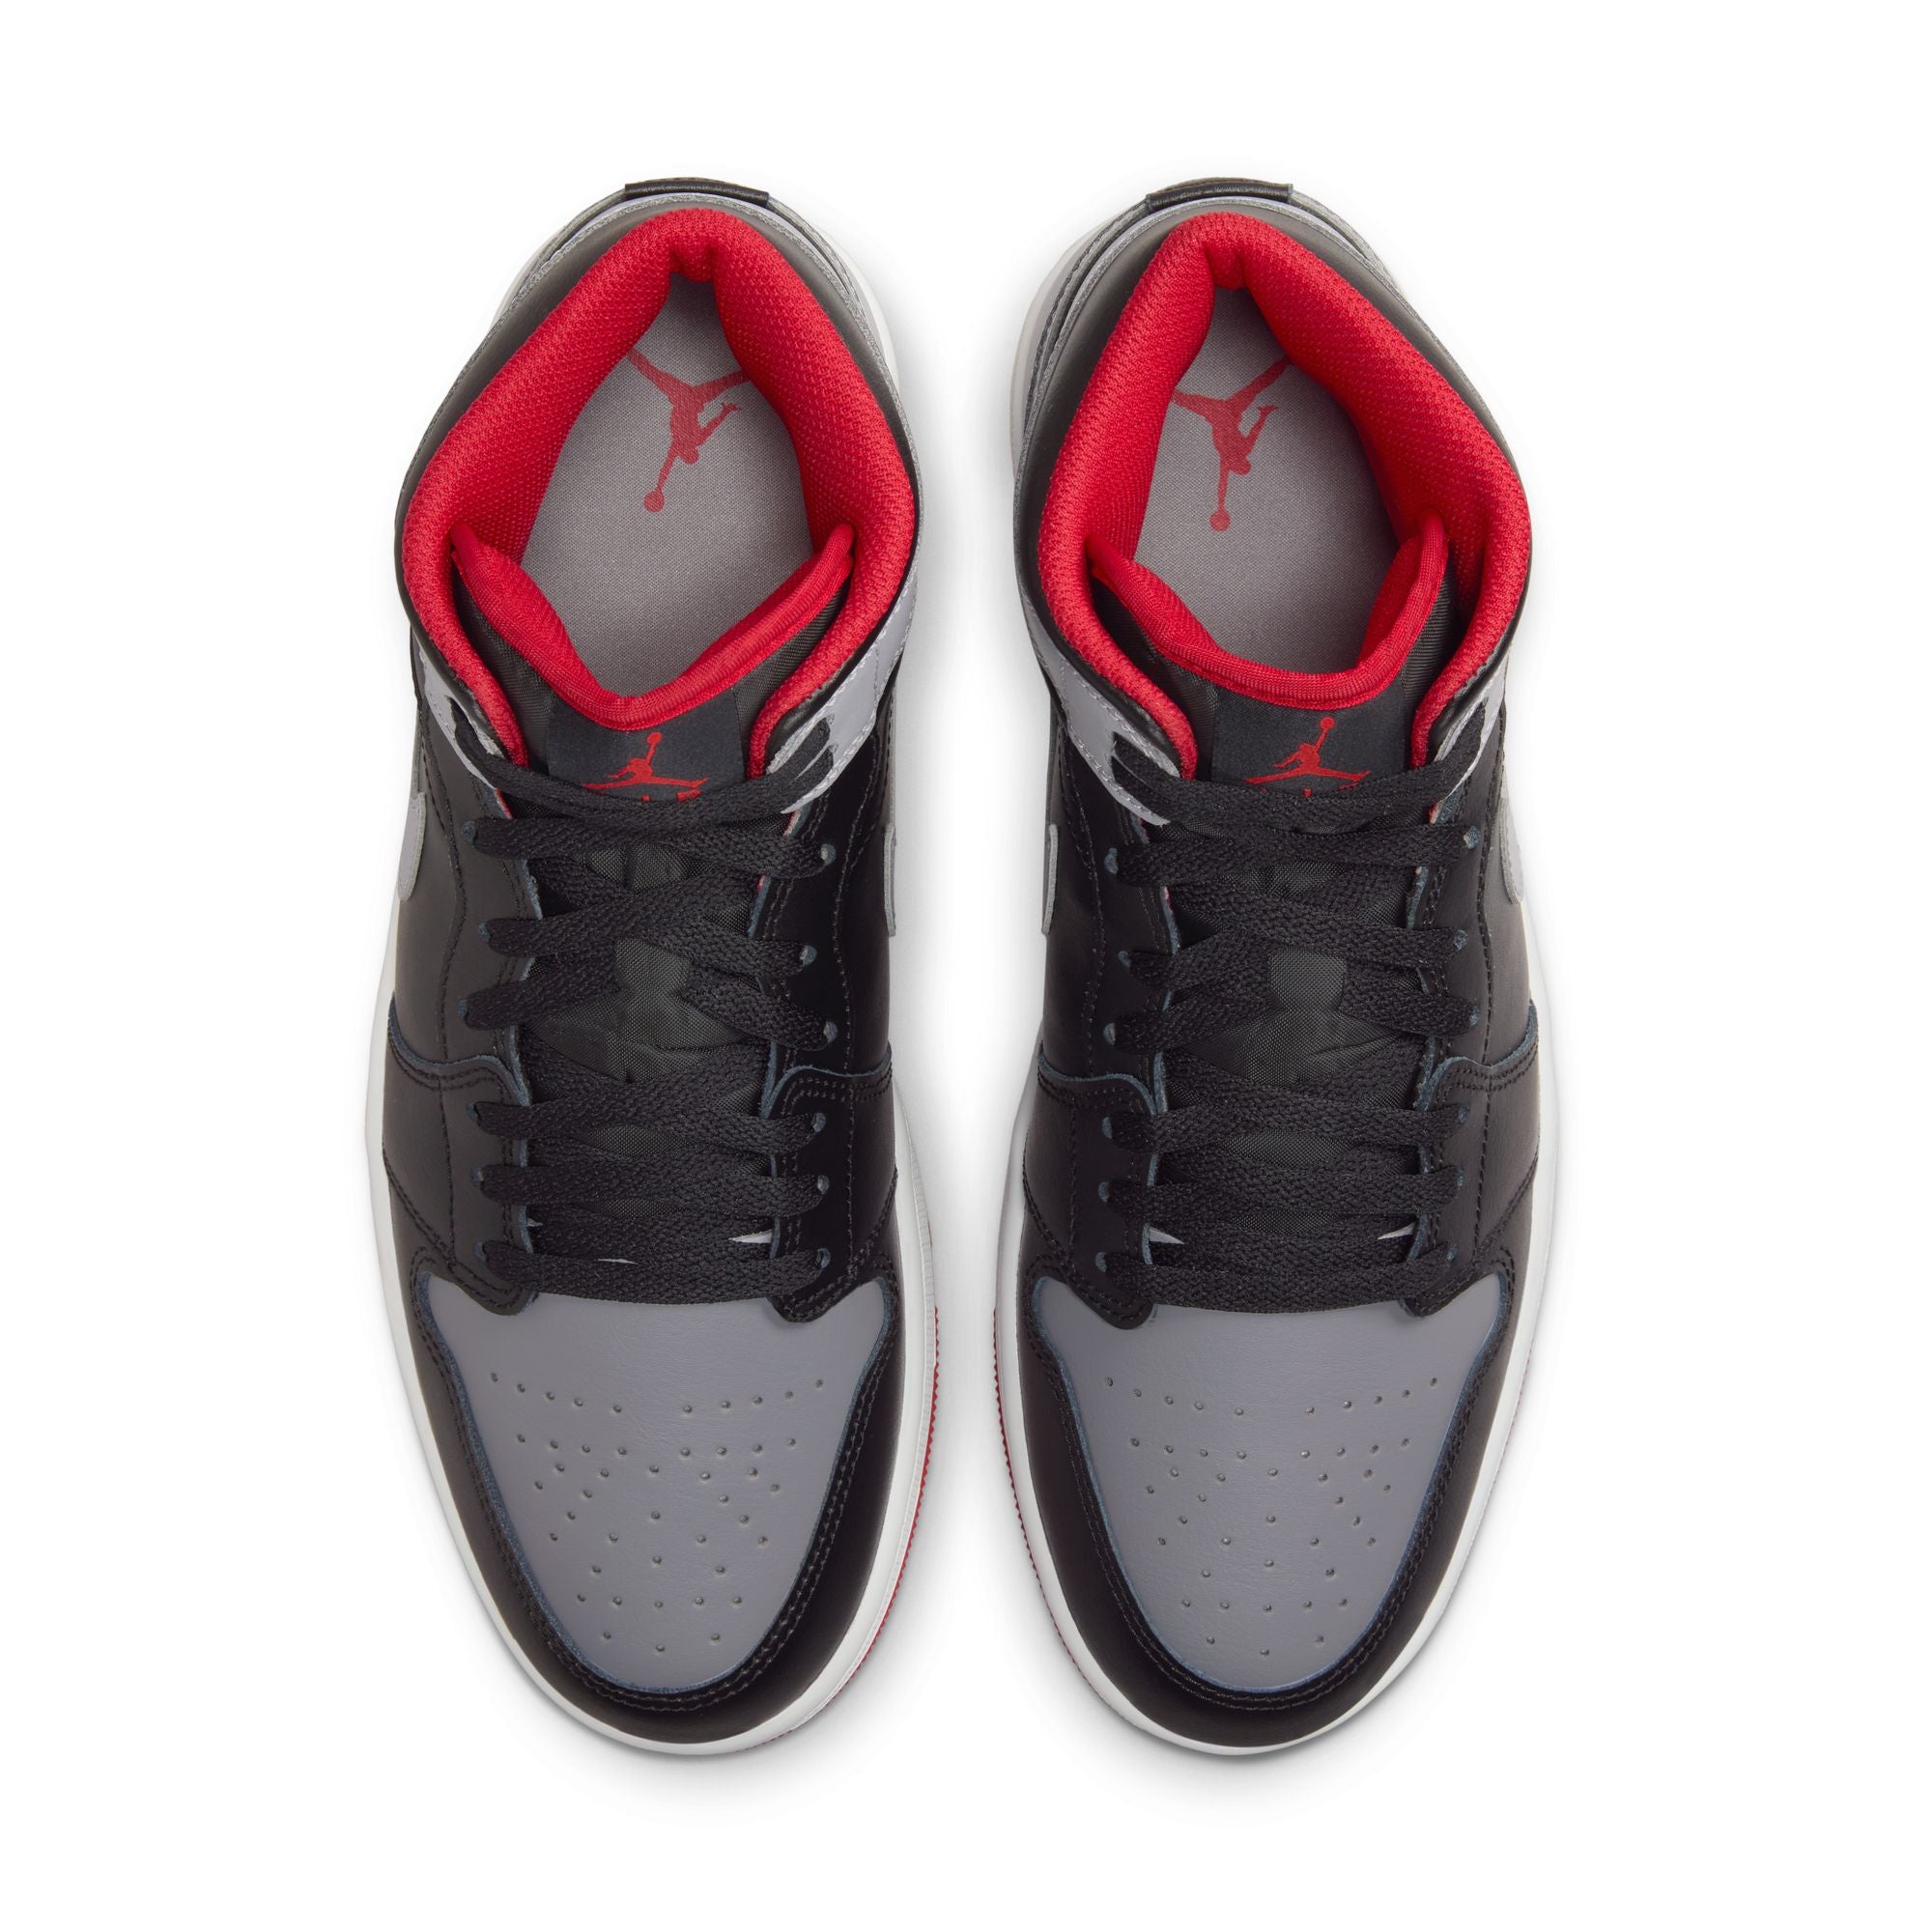 NIKE - Air Jordan 1 Mid - (Black/Cement Grey-Fire Red-Whi) view 6